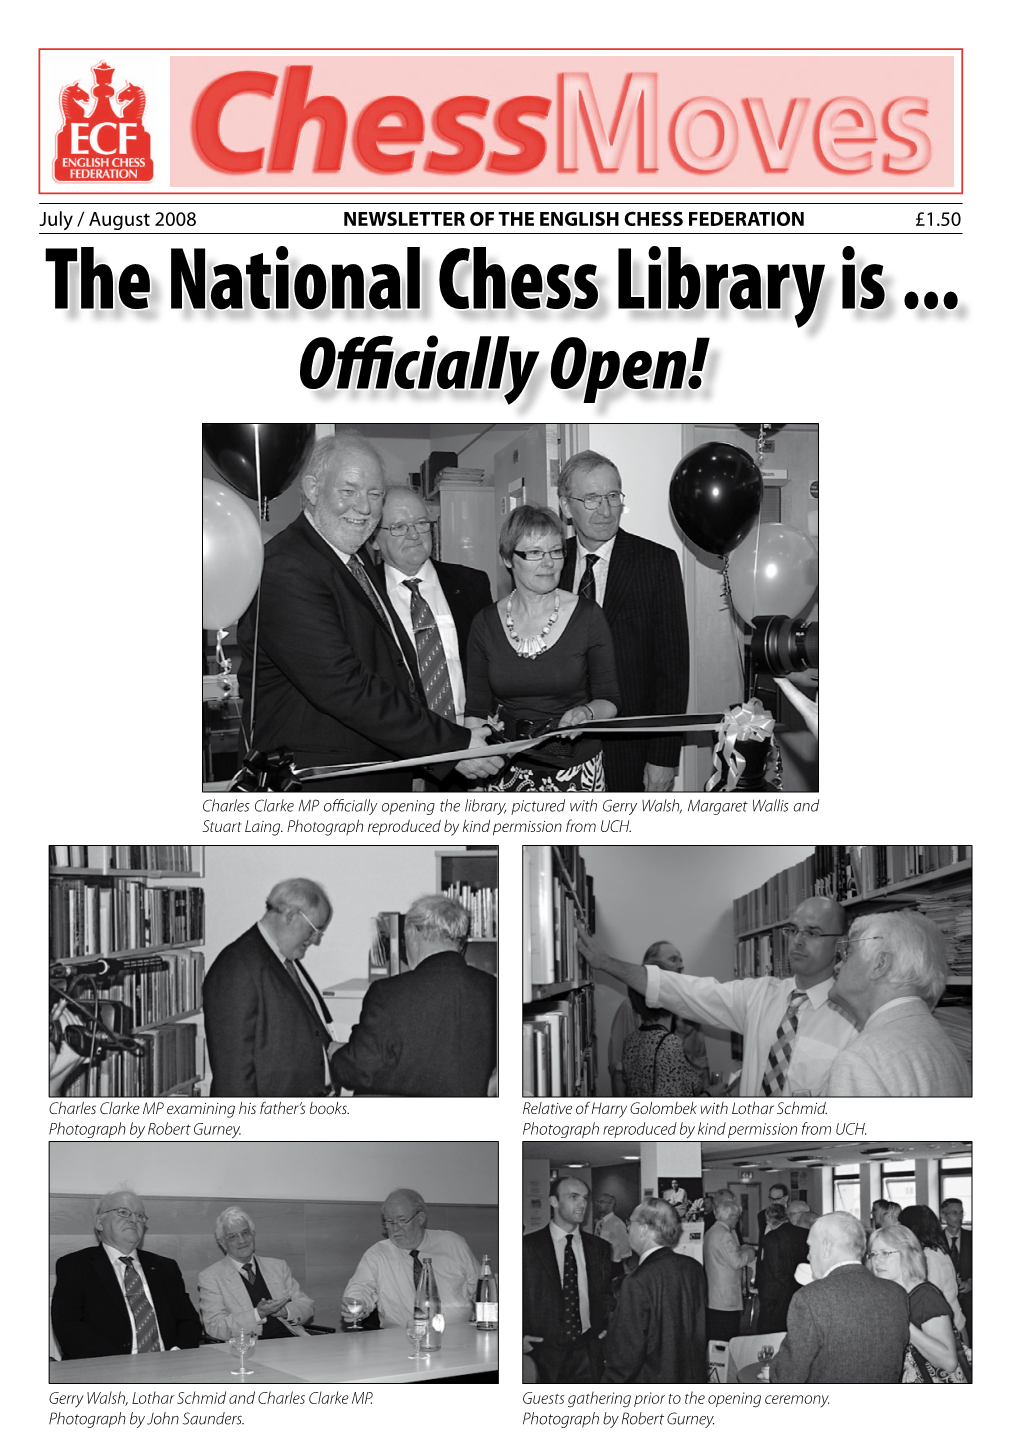 The National Chess Library Is